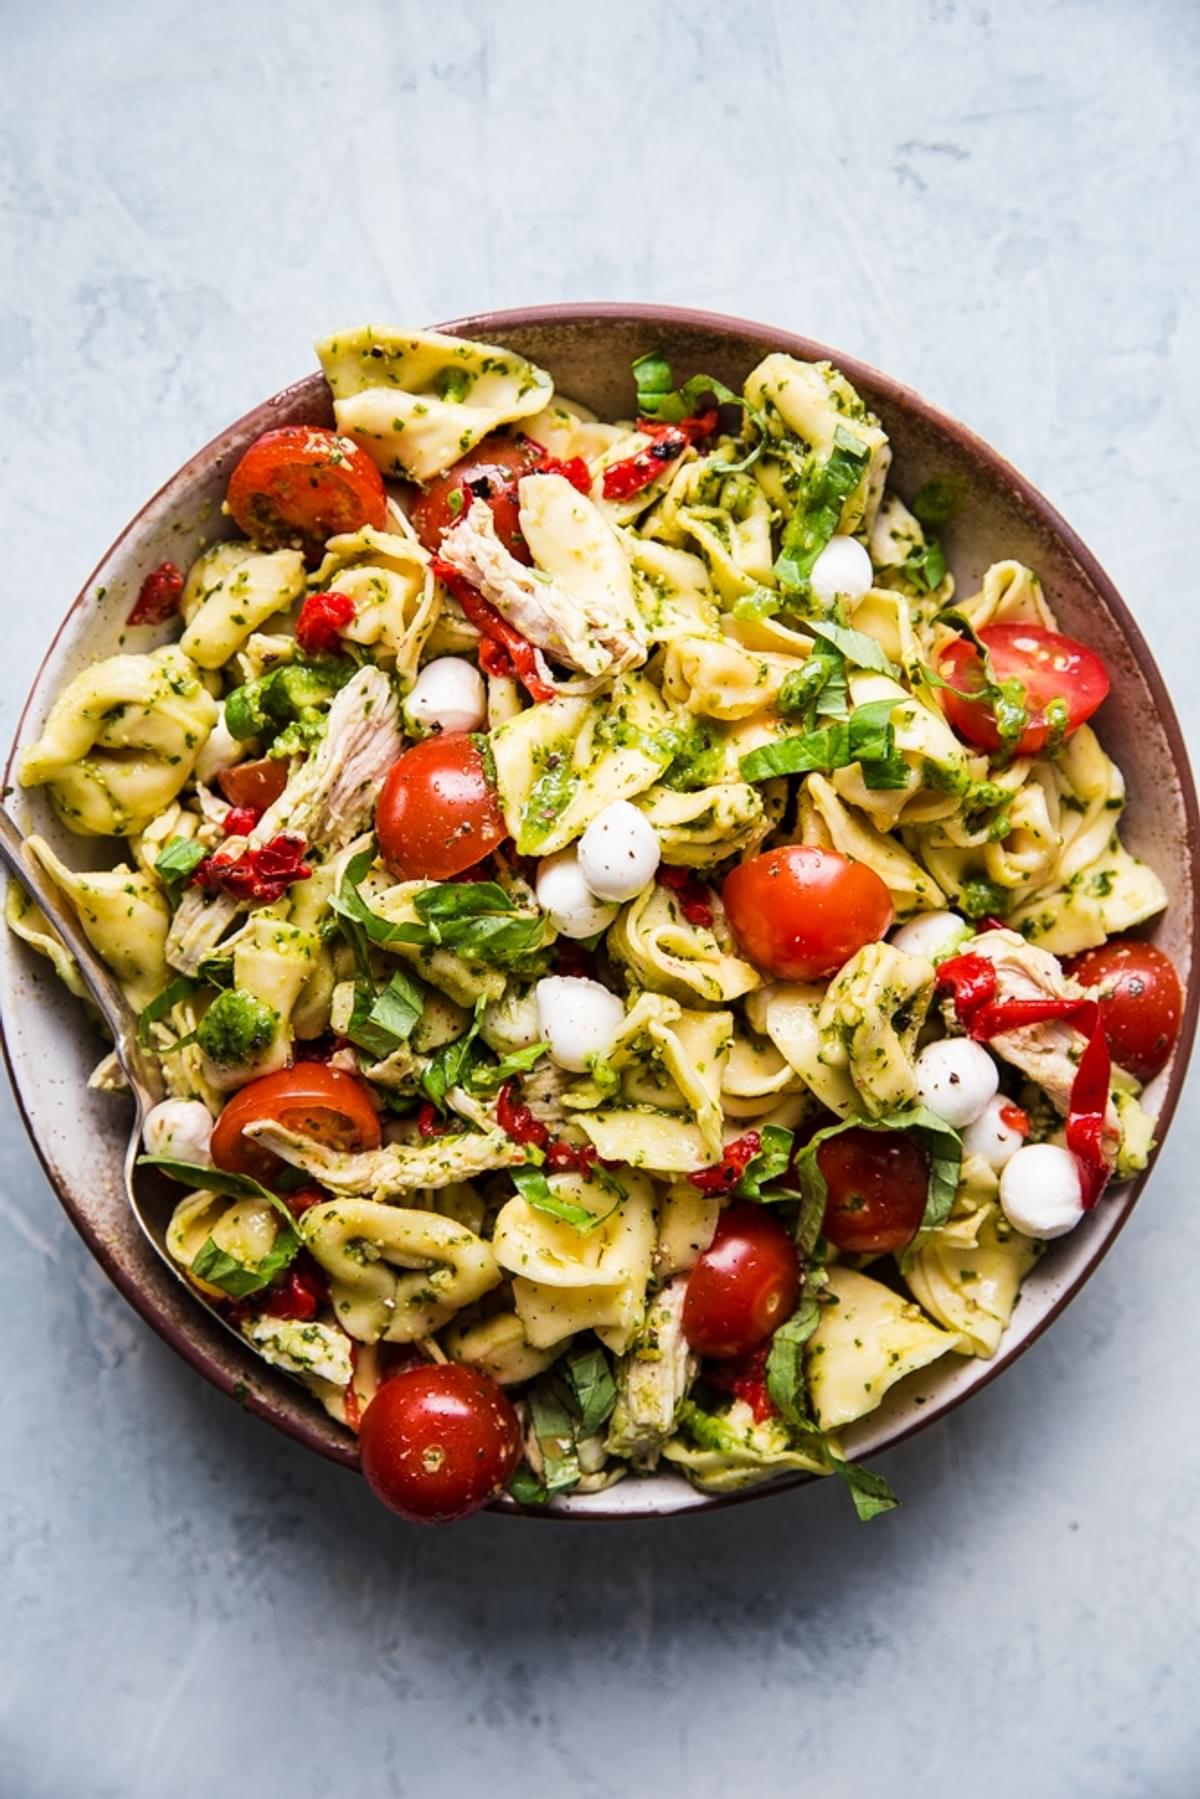 Pasta salad with tortellini, pesto, mozzarella, roasted red bell peppers, cherry tomatoes and shredded chicken